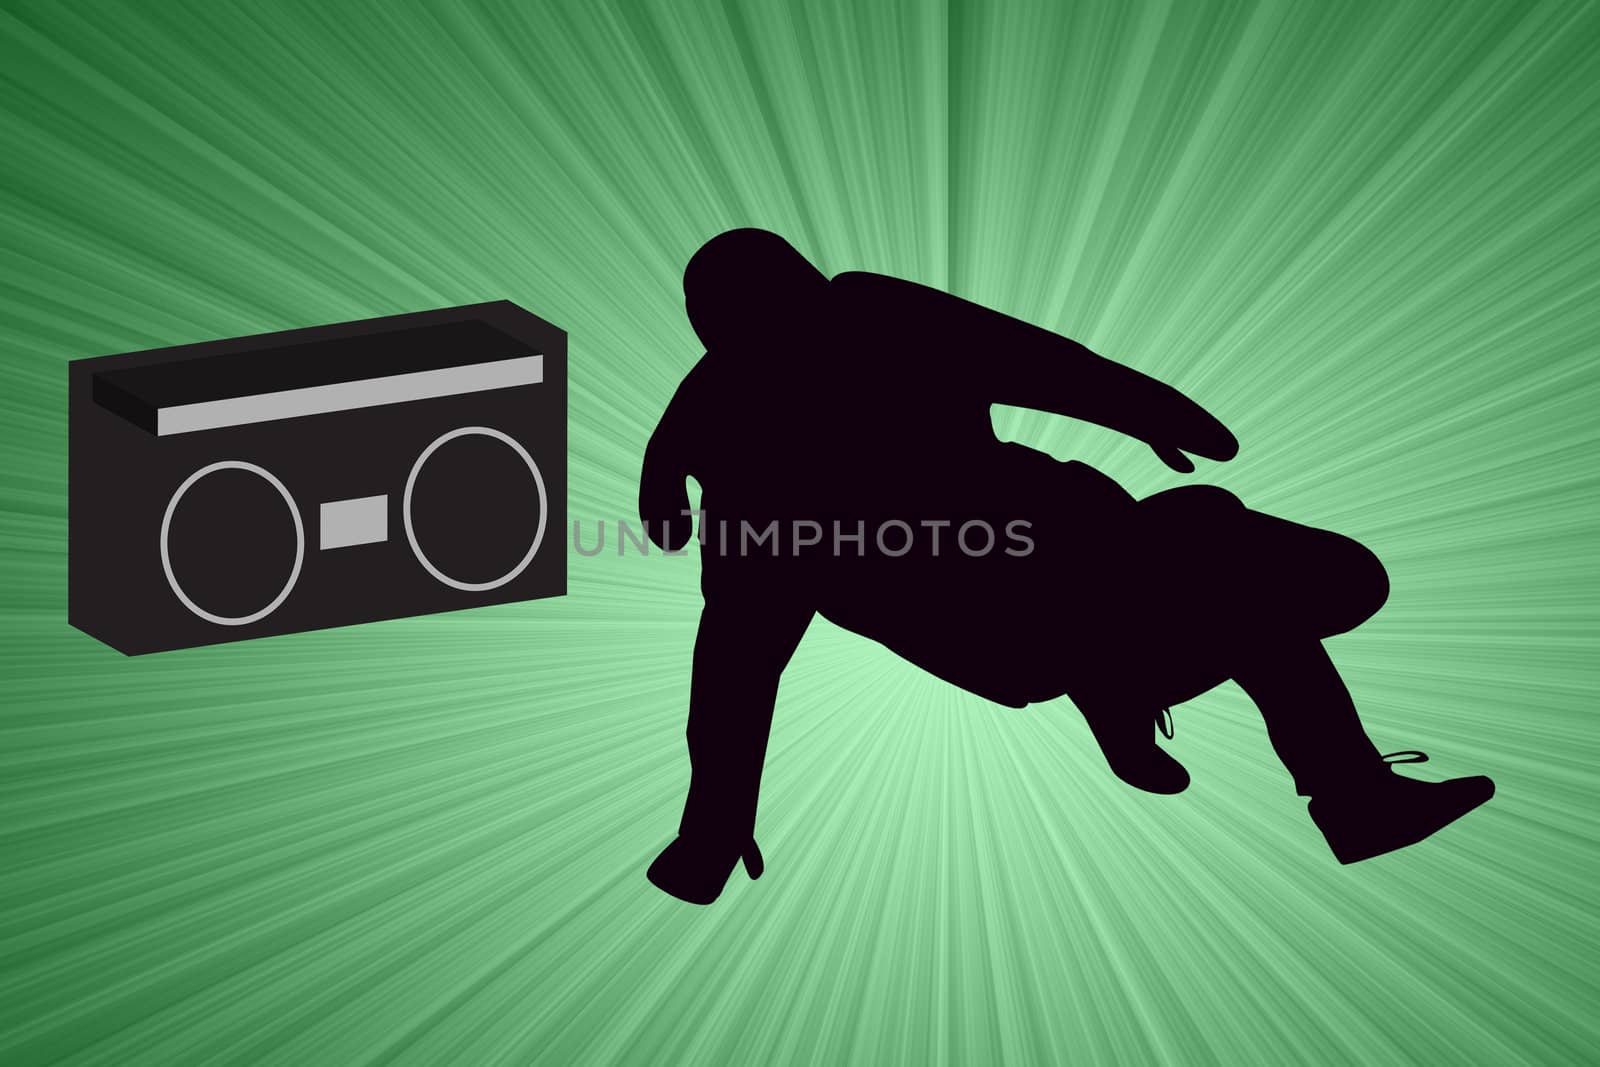 Breakdancer Dancing with Old School Boom Box Silhouette illustration.  